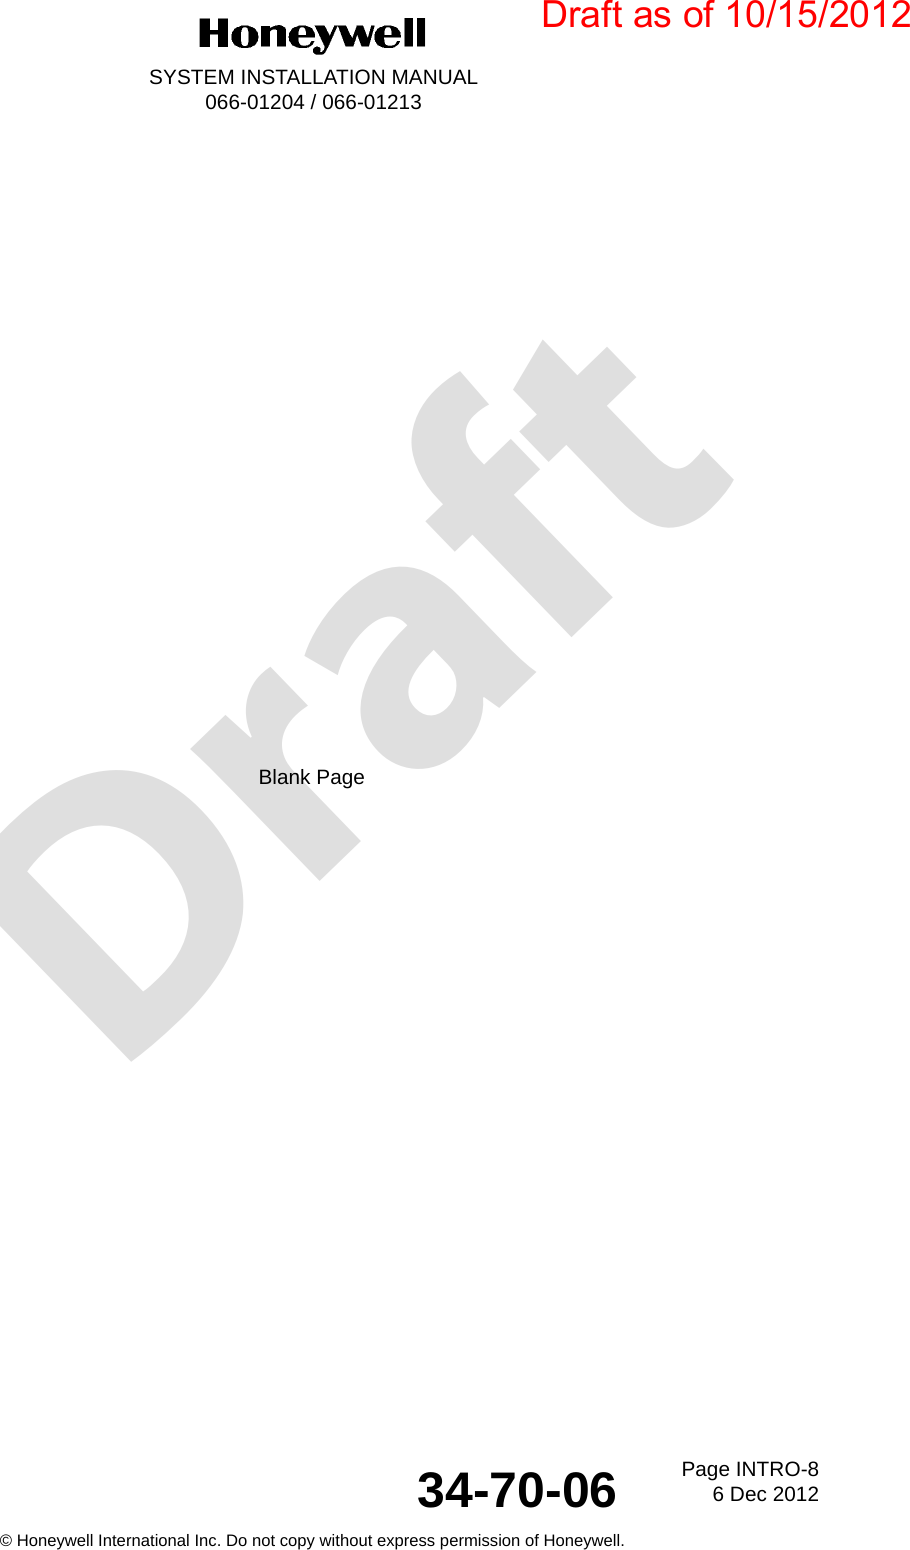 DraftPage INTRO-86 Dec 201234-70-06SYSTEM INSTALLATION MANUAL066-01204 / 066-01213© Honeywell International Inc. Do not copy without express permission of Honeywell.Blank PageDraft as of 10/15/2012